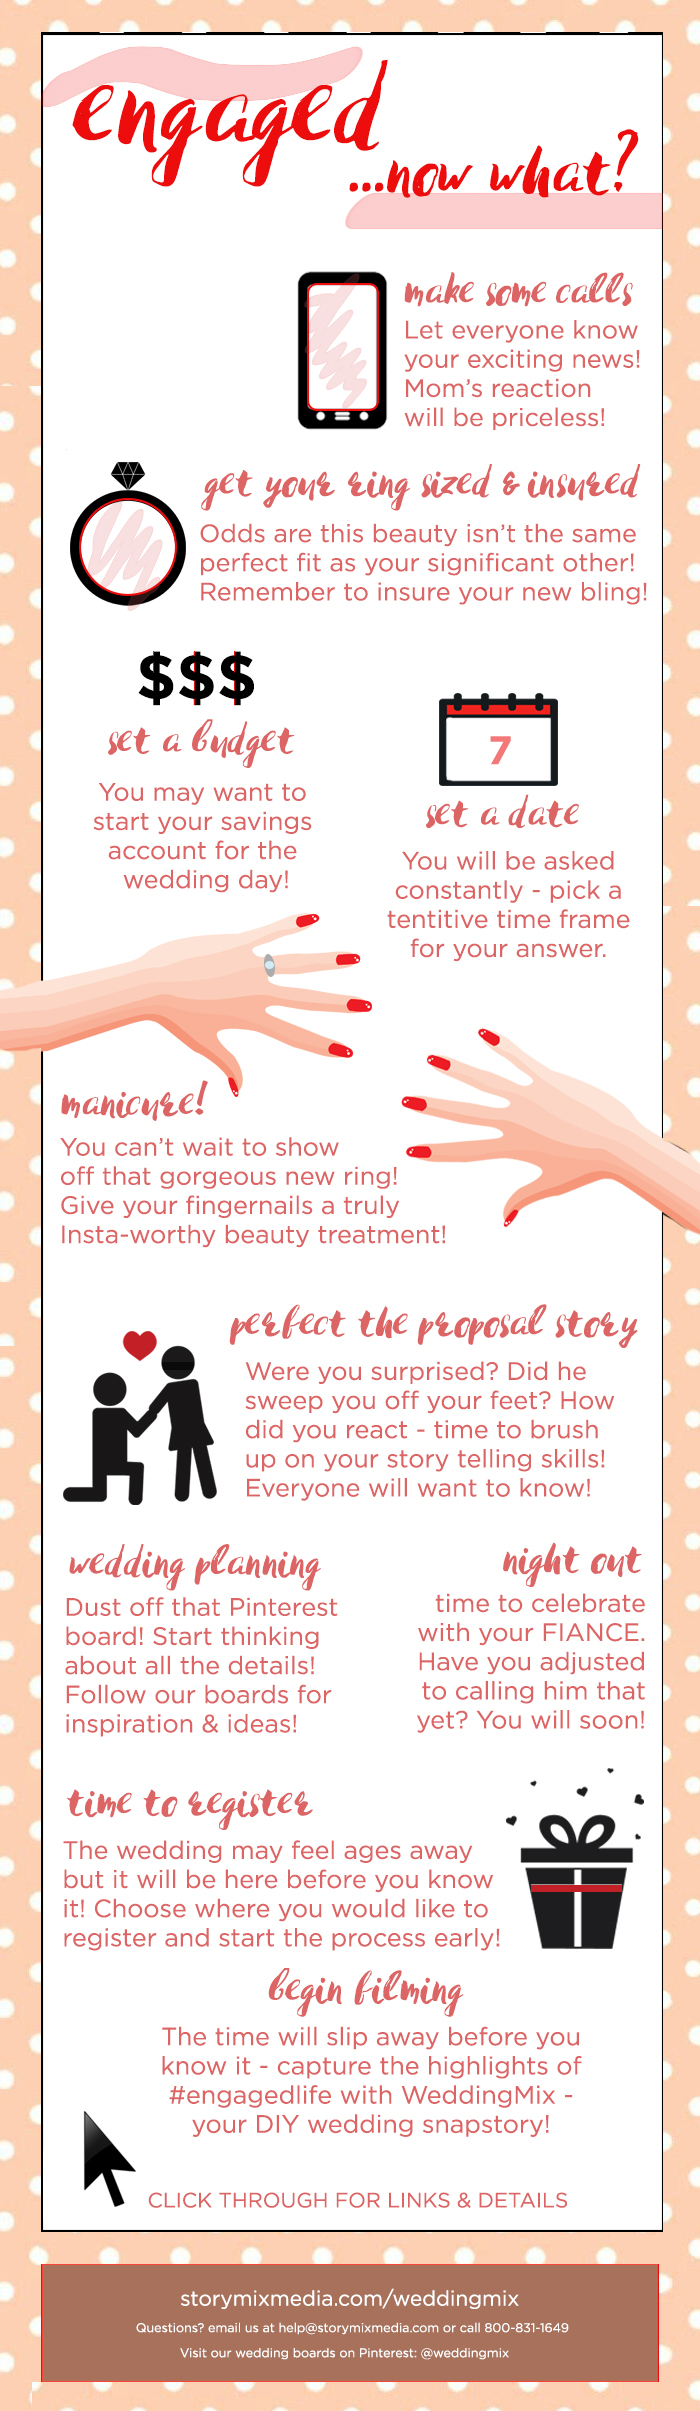 just engaged infographic